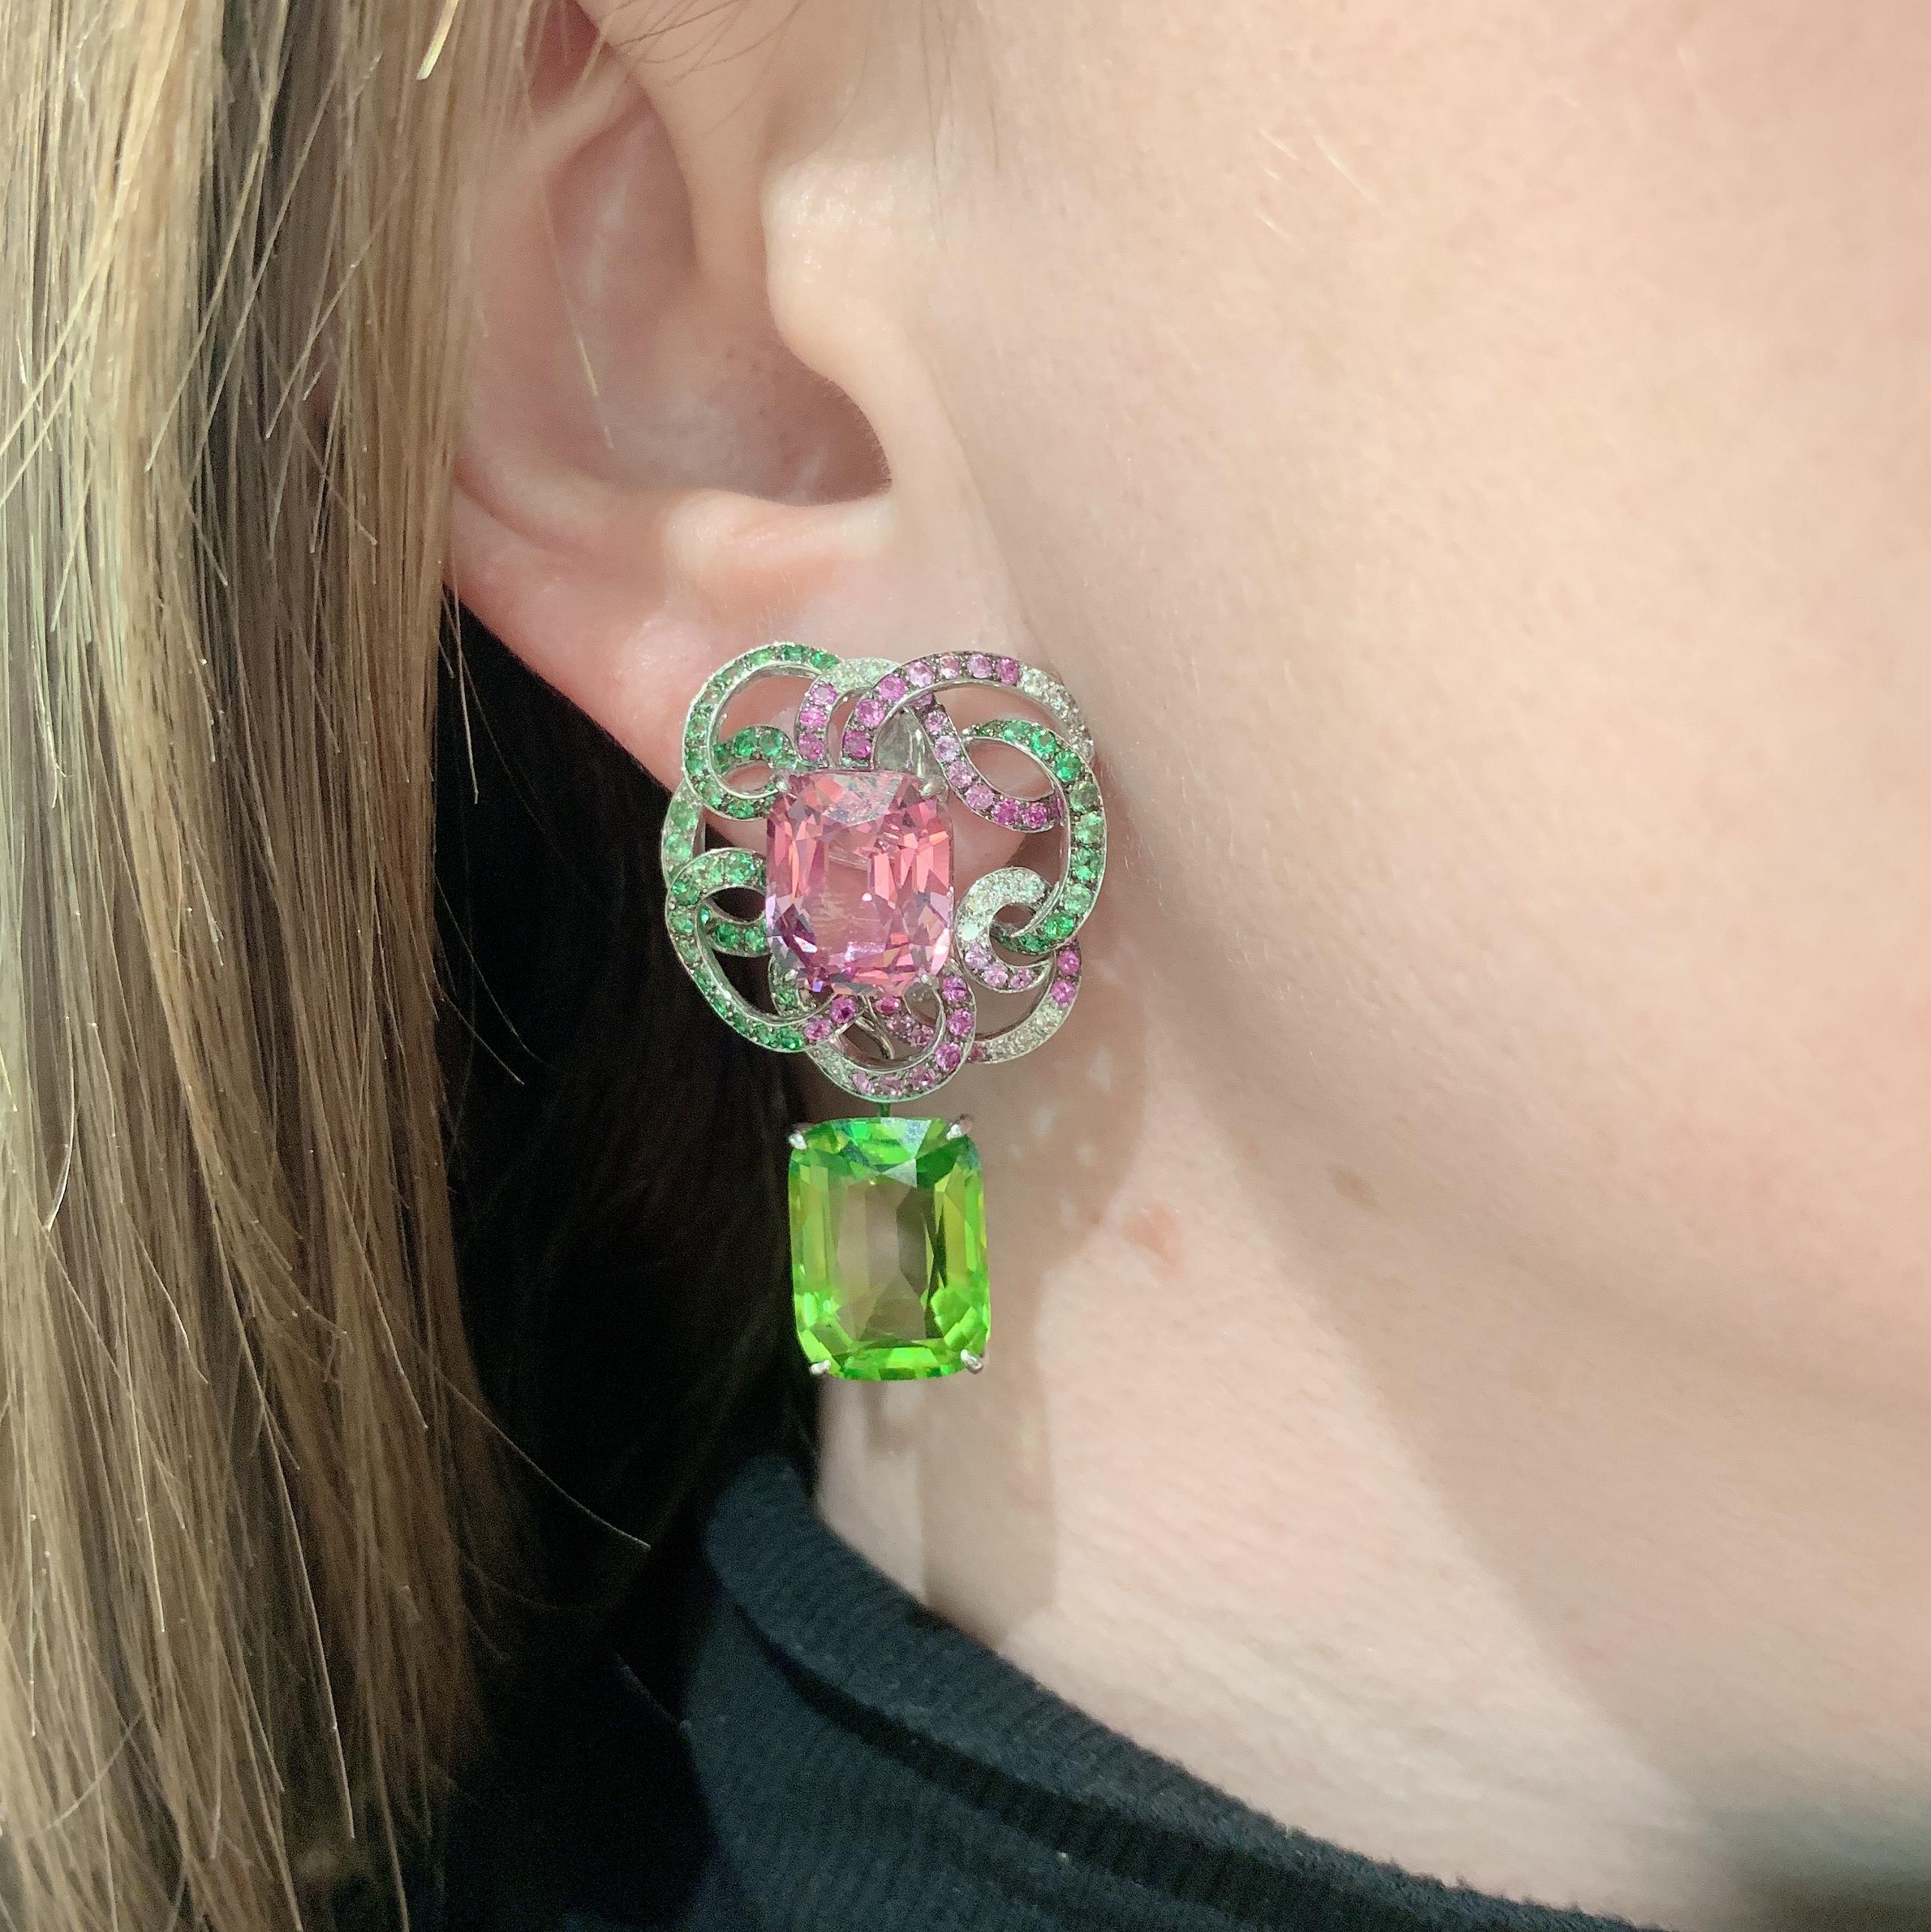 Margot McKinney 18 karat White Gold Earrings set with a pair of Pink Spinel 14.19ct surrounded by a swirl of  35 White Diamonds 0.47ct, 99 Tsavorite Garnets 1.41ct and 80 Pink Sapphires 1.08ct with a pair of detachable Peridot 15.77ct Pendant Drops.